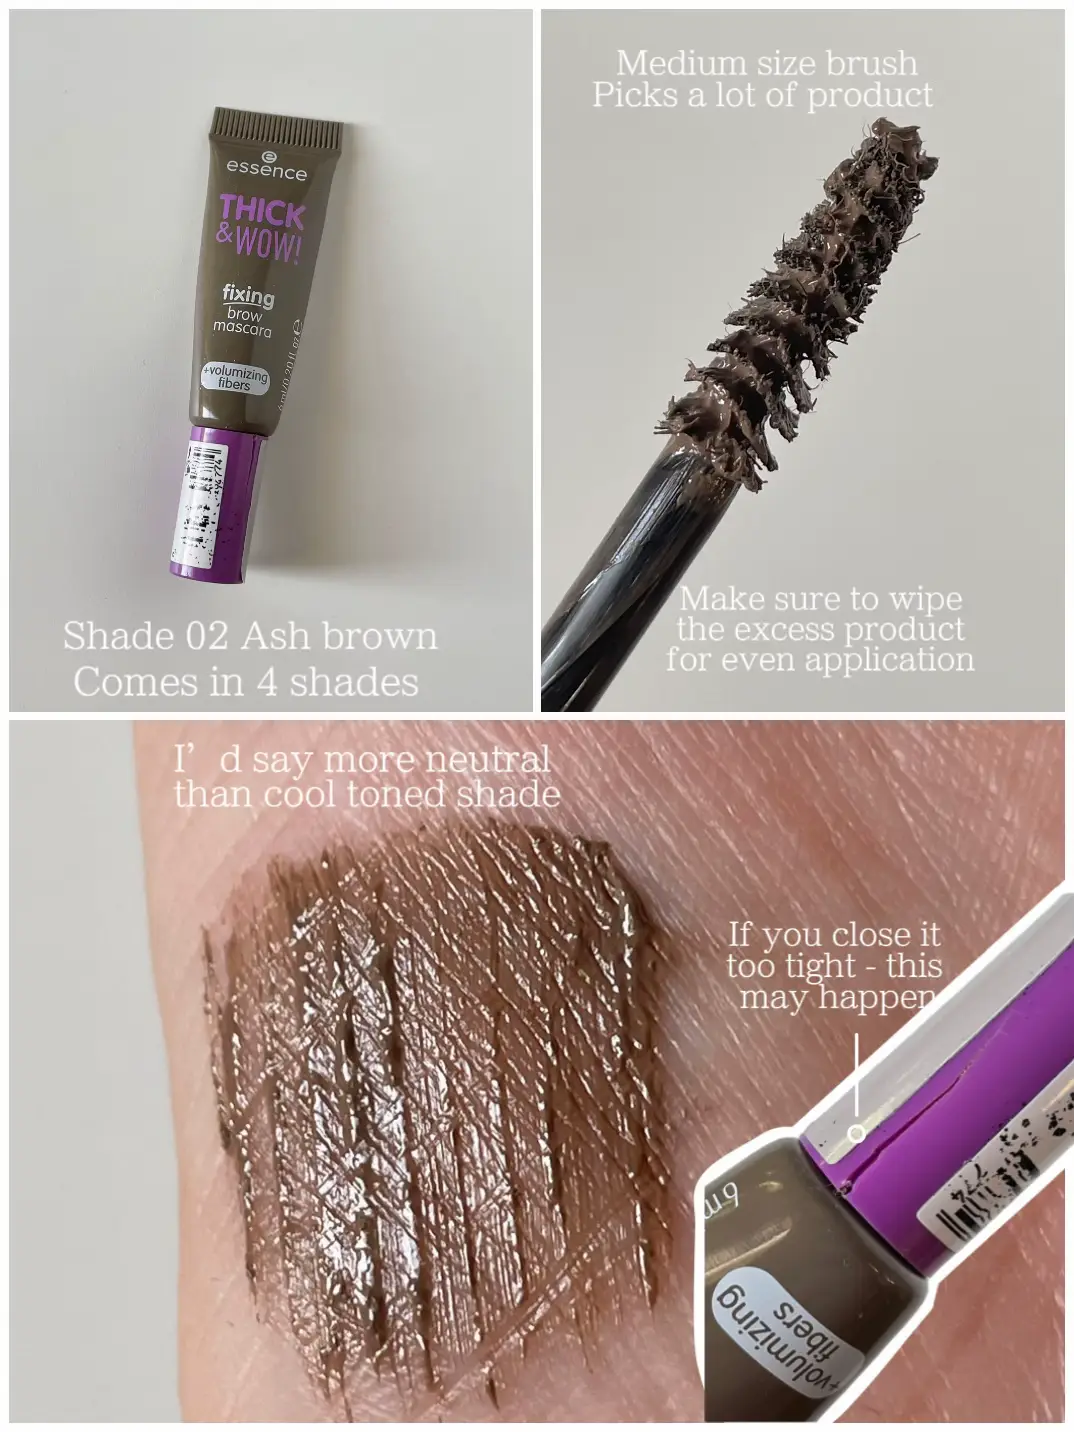 Essence Thick & wow brow mascara | Gallery posted by Jovana | Lemon8